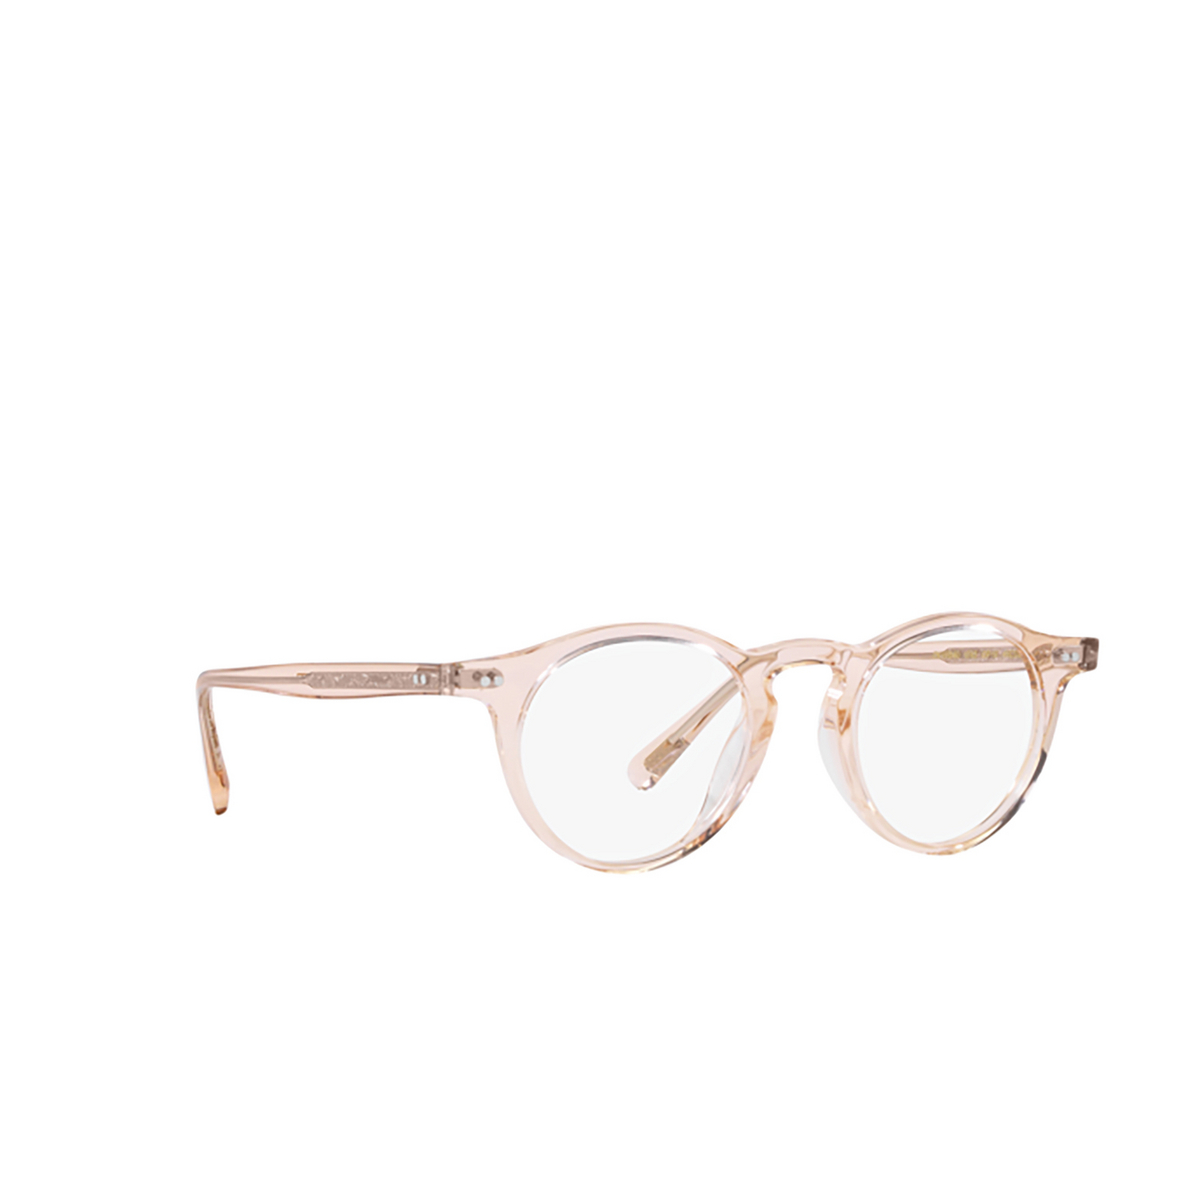 Oliver Peoples OP-13 Eyeglasses 1743 Cherry Blossom - three-quarters view